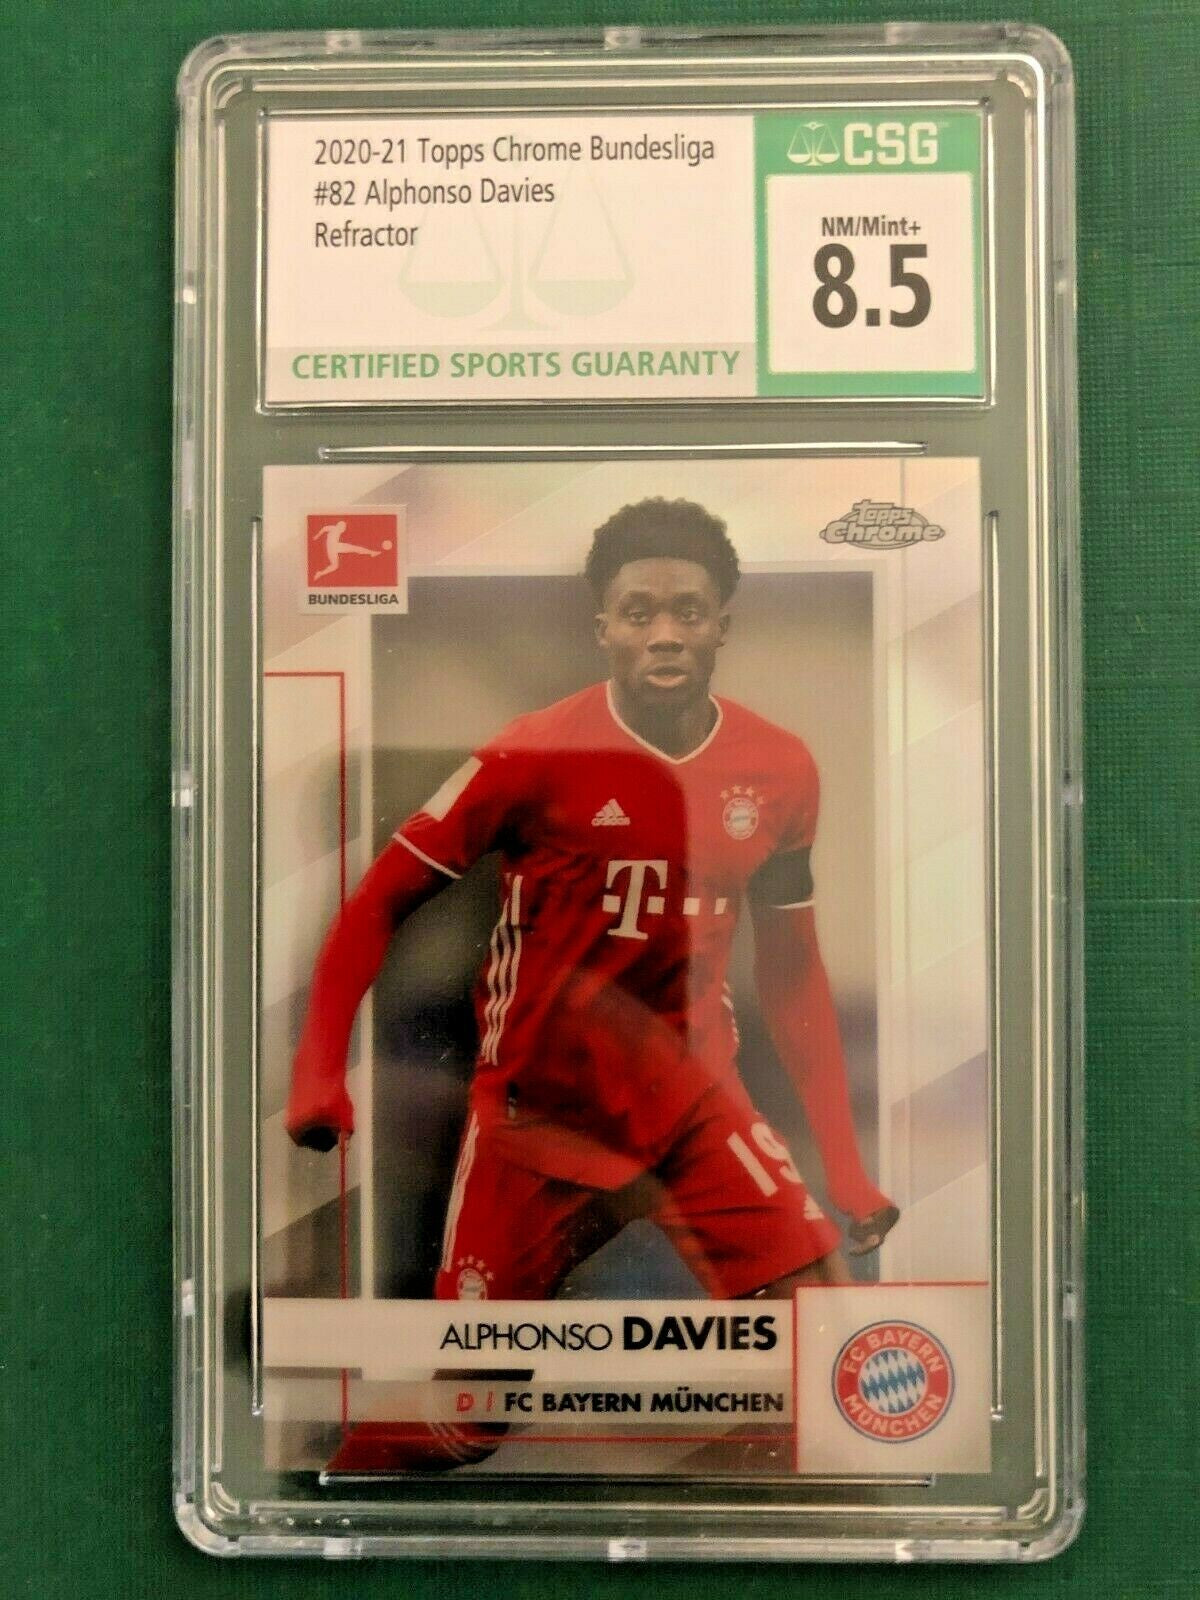 Alphonso Davies 1x Sports Card Single (CSG Graded 9 or Higher, Various Grading Companies, Randomly Selected, Stock Photo - Will Not Get Card In Picture, Used as an Example Only)